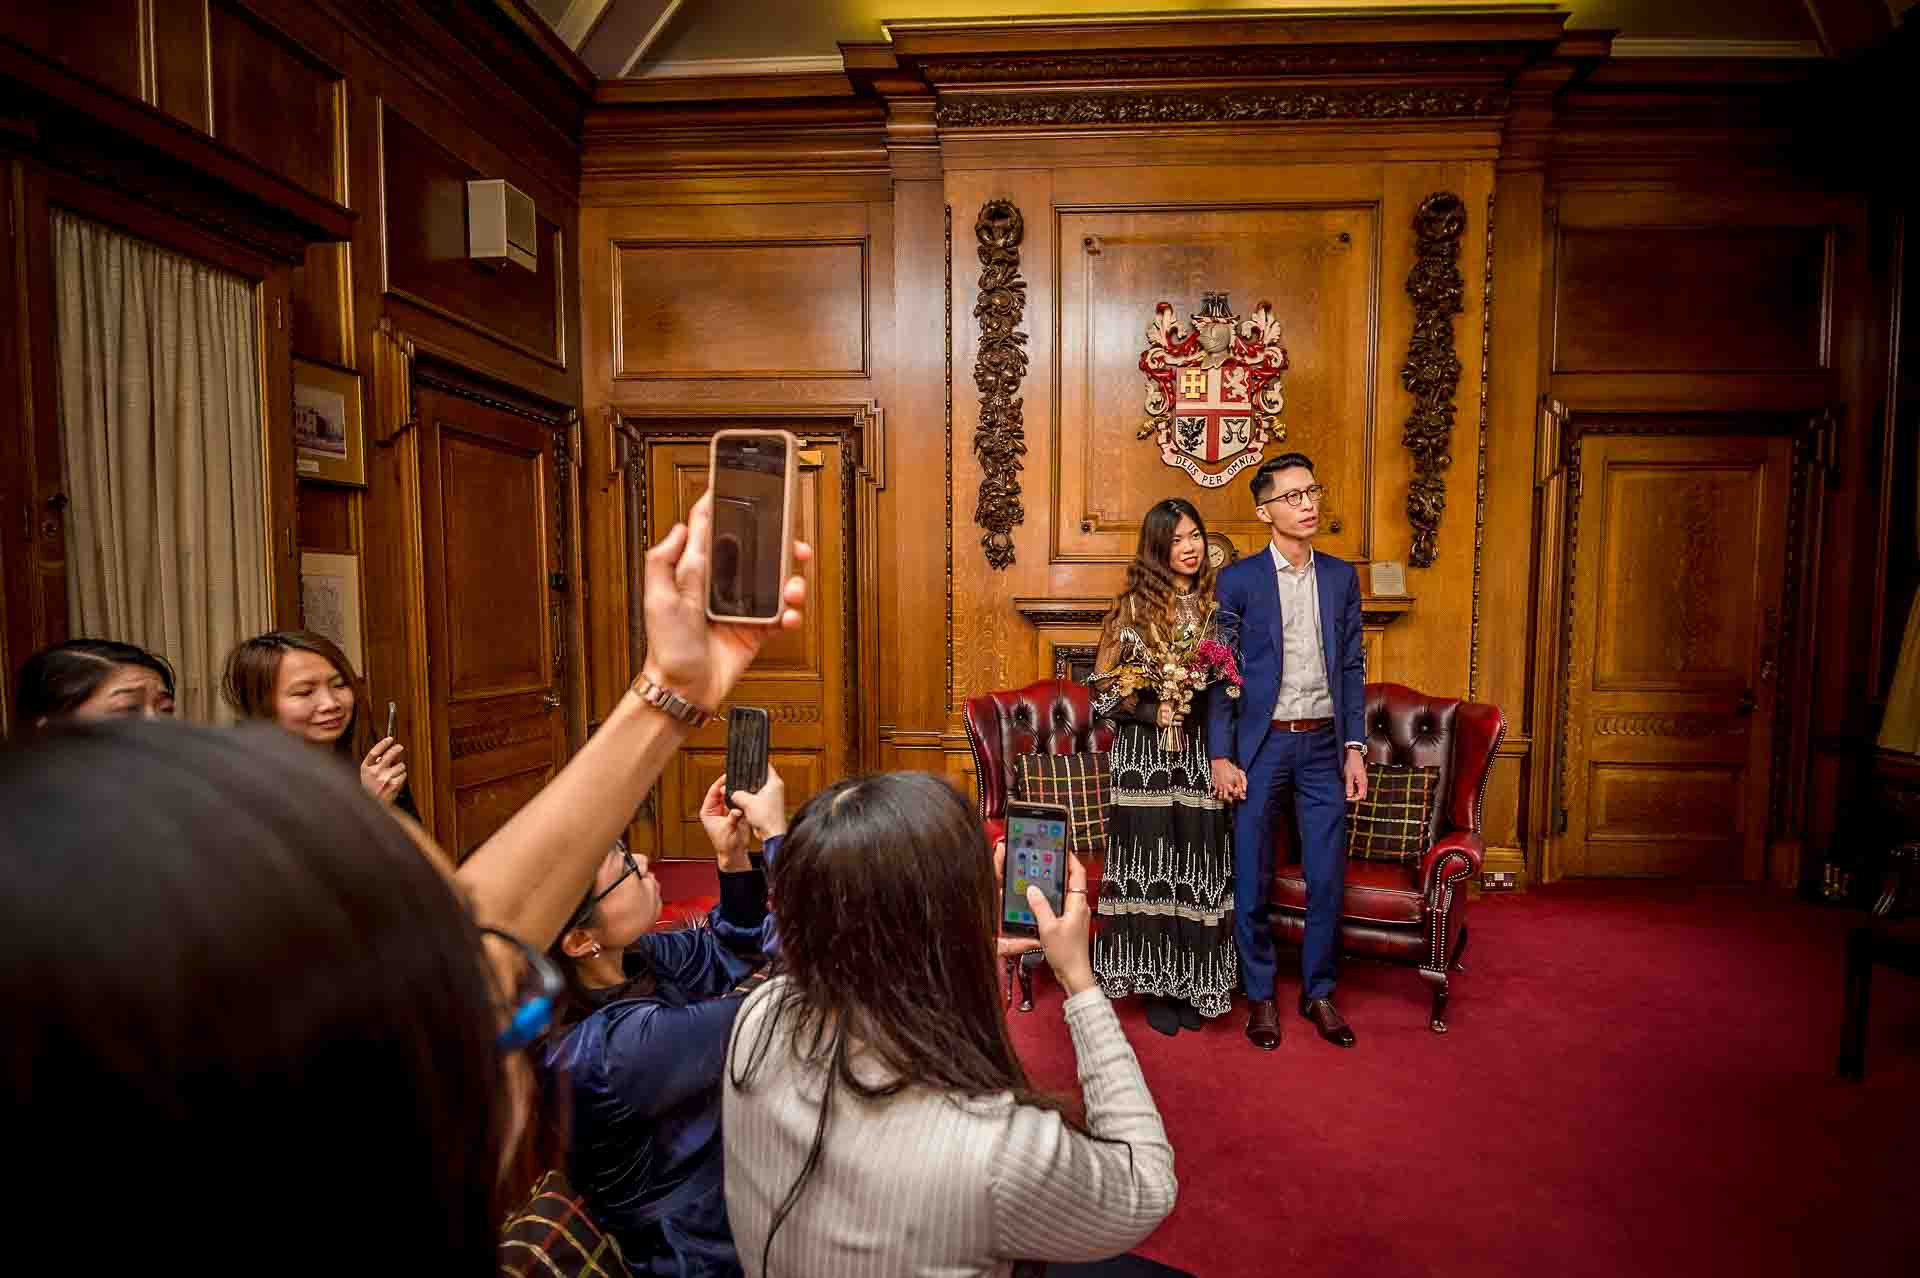 Guests taking wedding ceremony photos on their phones in the Mayor's Parlour in Islington